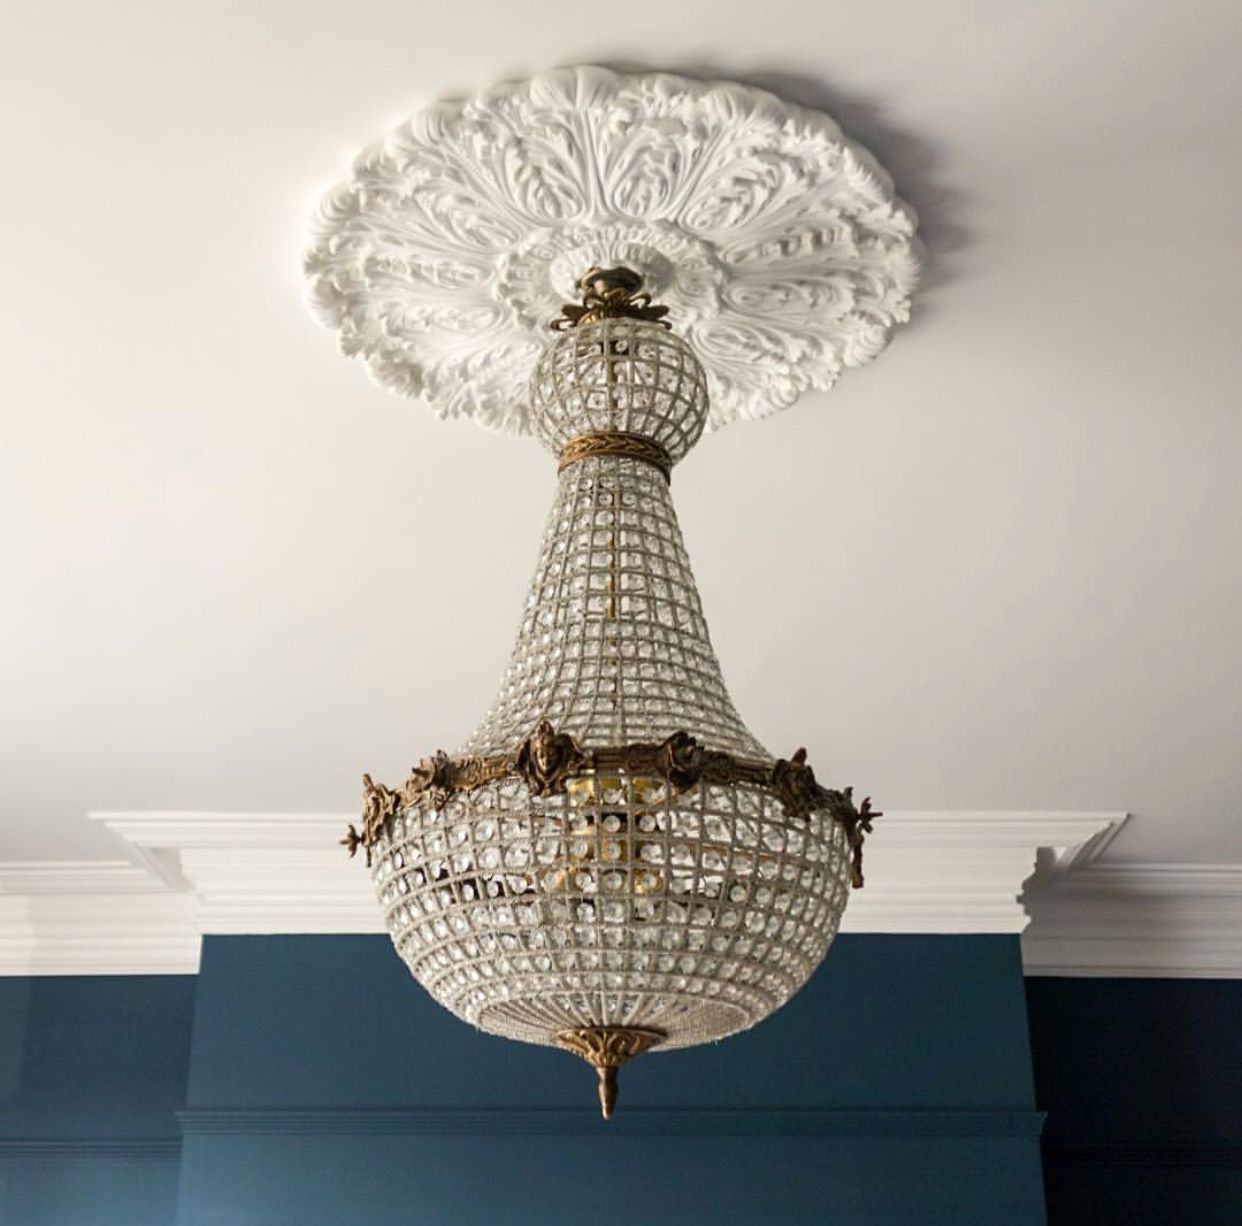 How To Hang A Heavy Chandelier?